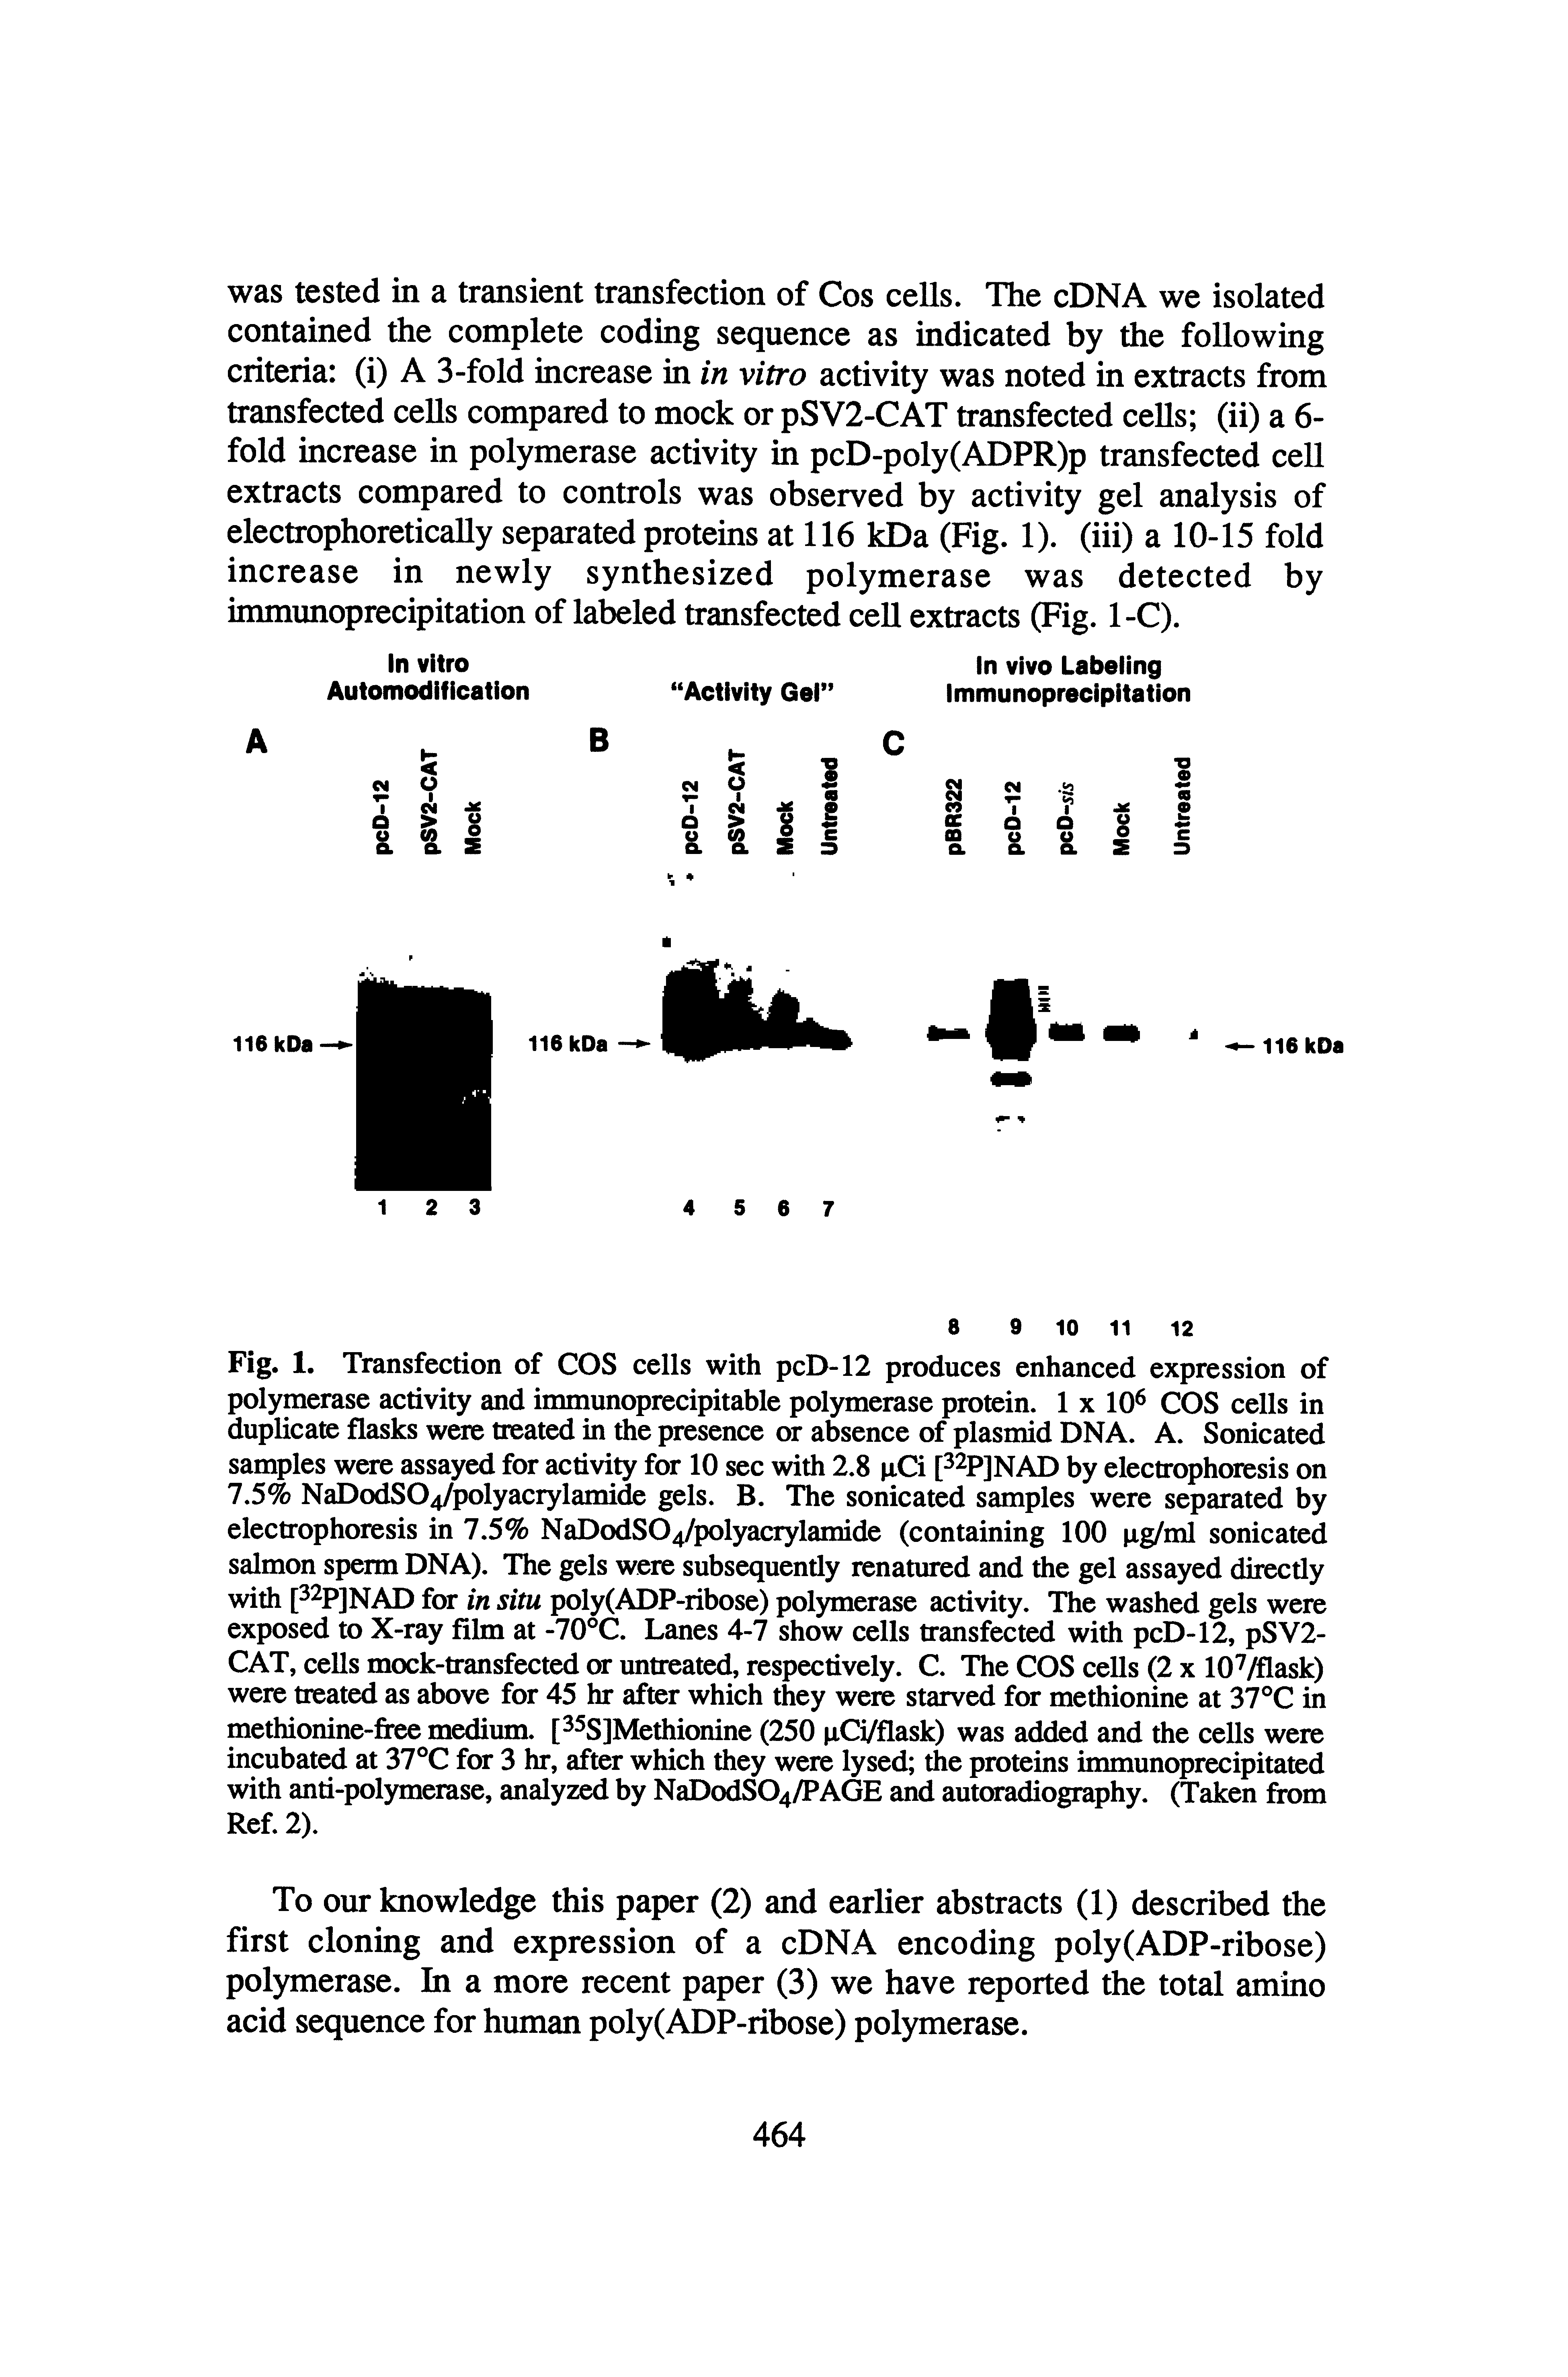 Fig. 1. Transfection of COS cells with pcD-12 produces enhanced expression of polymerase activity and immunoprecipitable polymerase protein. 1 x 10 COS cells in duplicate flasks were treated in the presence or absence of plasmid DNA. A. Sonicated samples were assayed for activity for 10 sec with 2.8 pCi P pjnAD by electrophoresis on 7.5% NaDodS04/polyacrylamide gels. B. The sonicated samples were separated by electrophoresis in 7.5% NaDodS04/polyacrylamide (containing 100 pg/ml sonicated salmon sperm DNA). The gels were subsequently renatured and the gel assayed directly with for in situ poly(ADP-ribose) polymerase activity. The washed gels were...